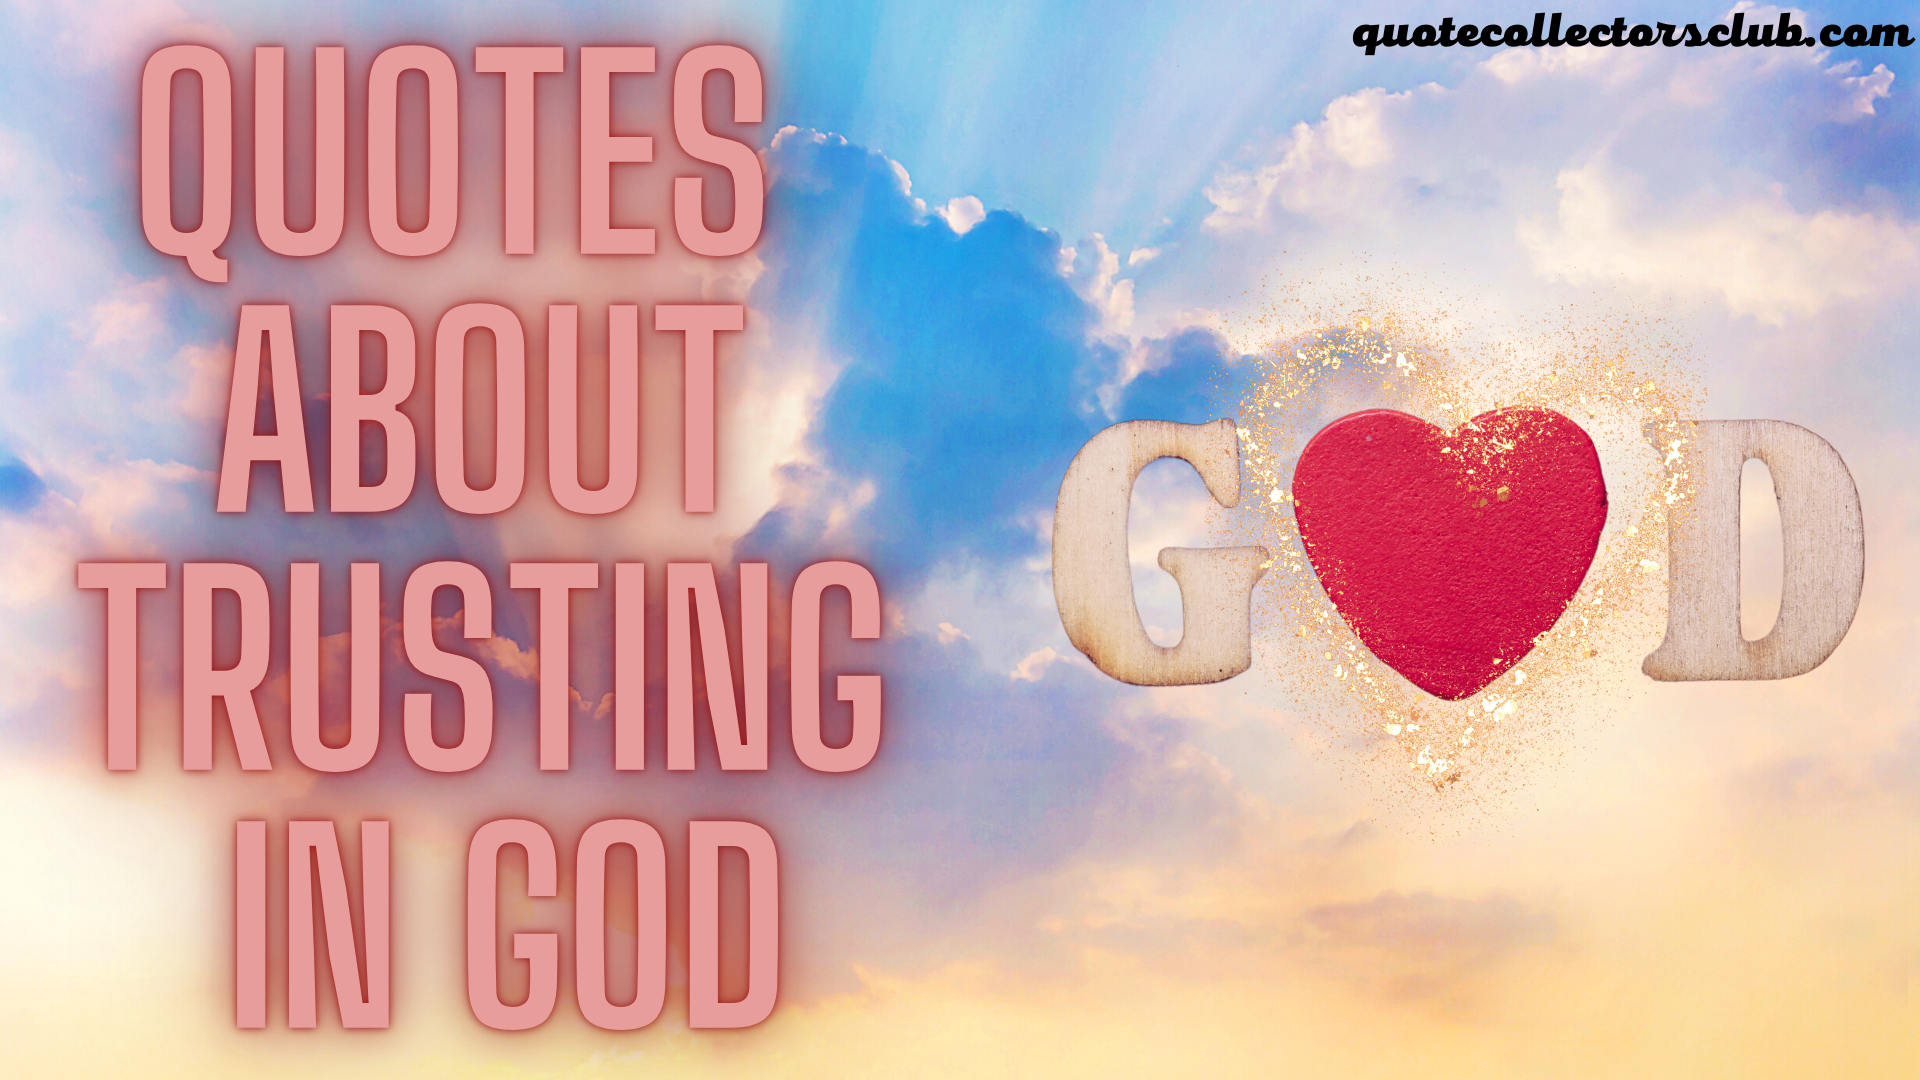 Quotes About Trusting in God to Help during Troubled Times